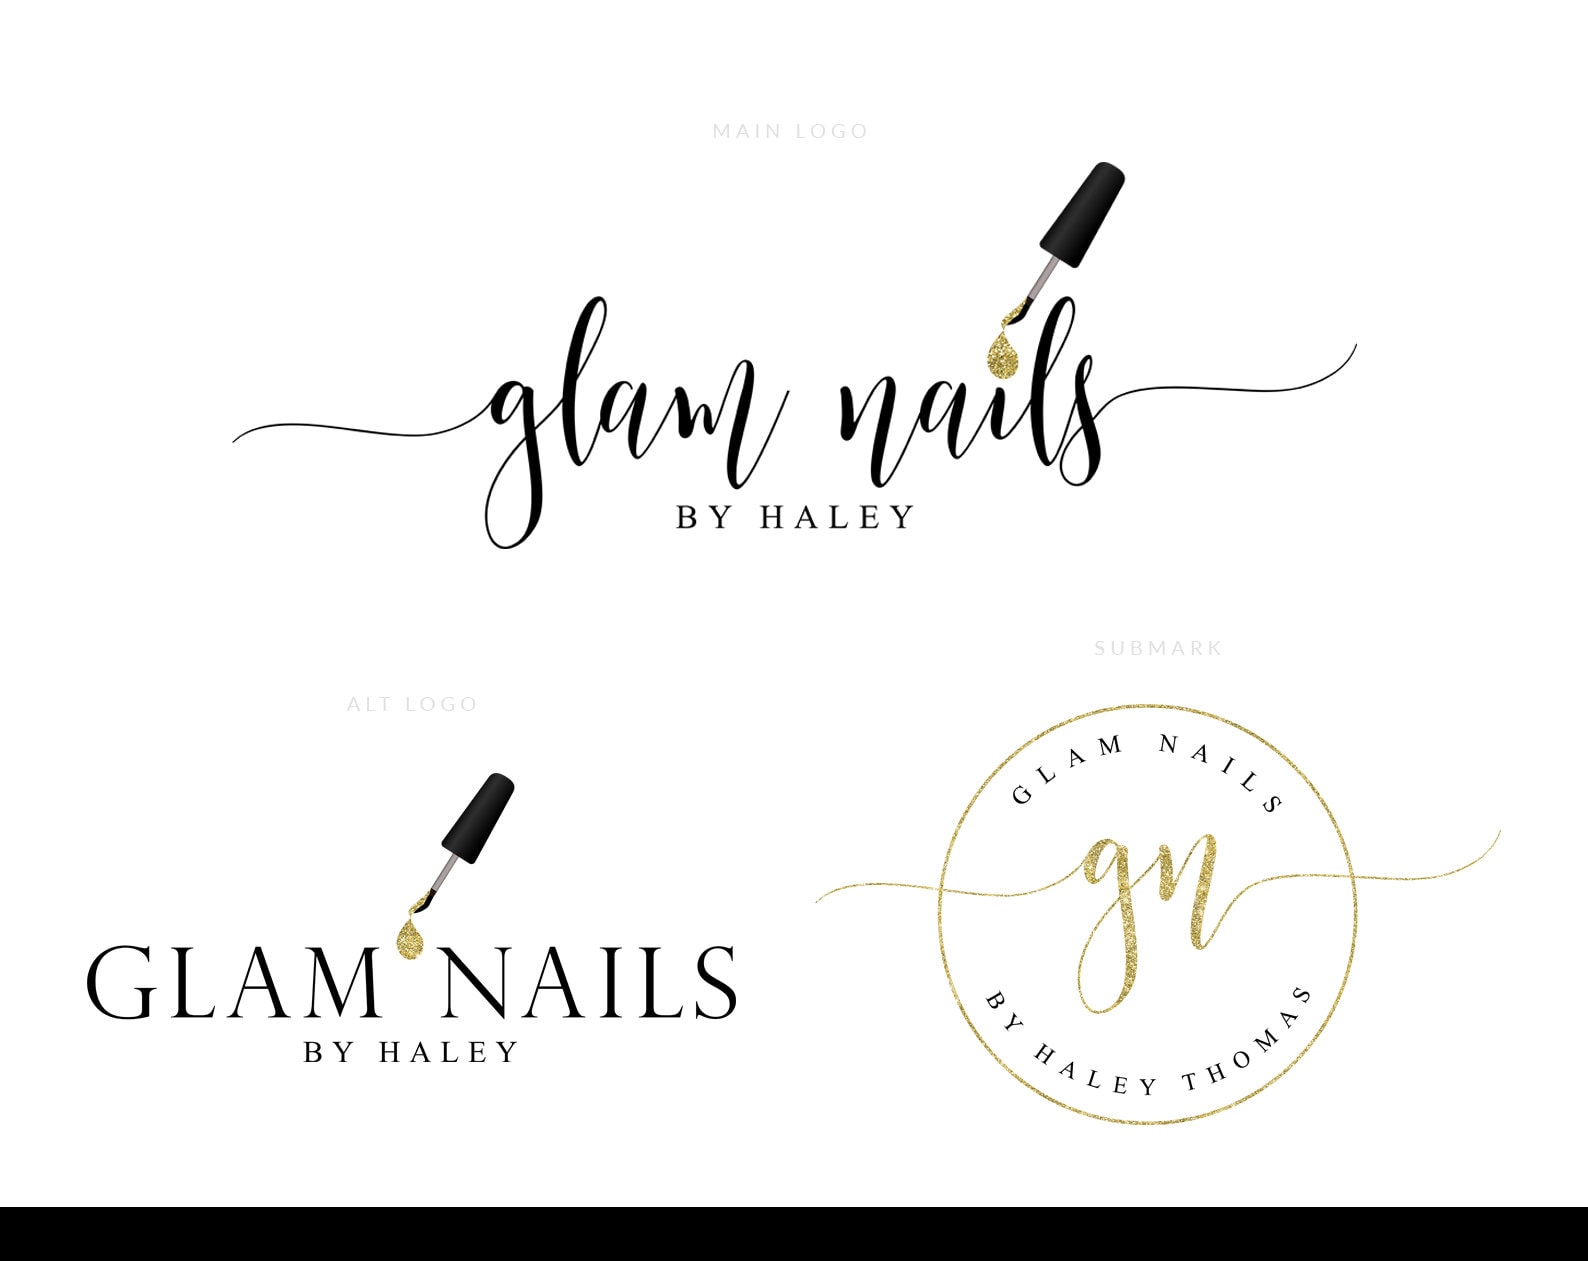 2. The Ultimate Guide to Nail Art: Over 1000 Designs - wide 2